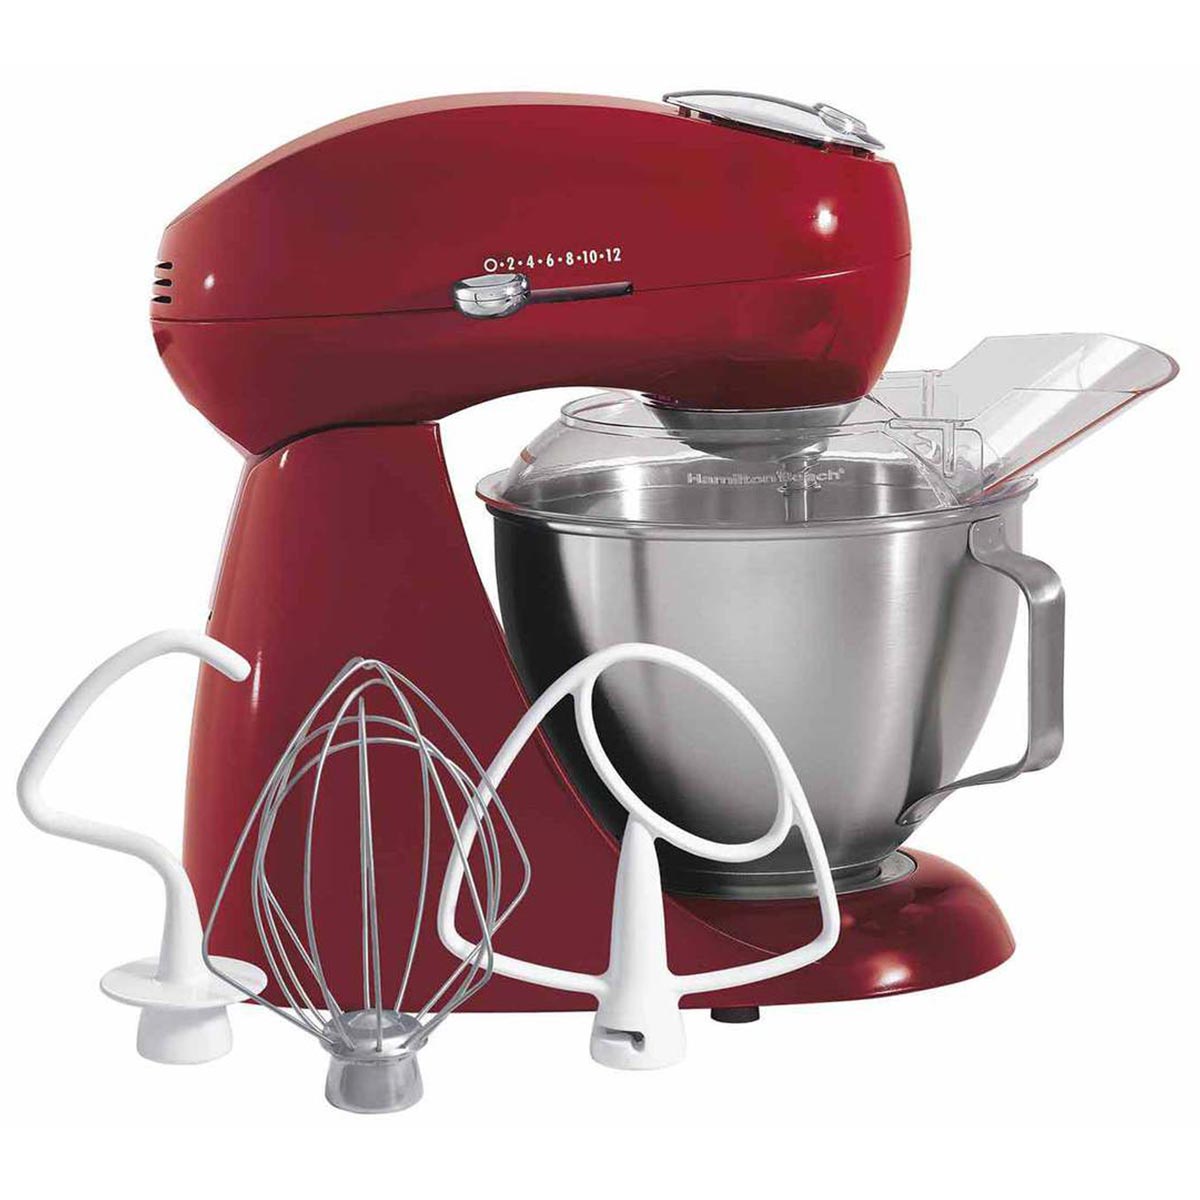 Eclectrics® Carmine Red All-Metal Stand Mixer